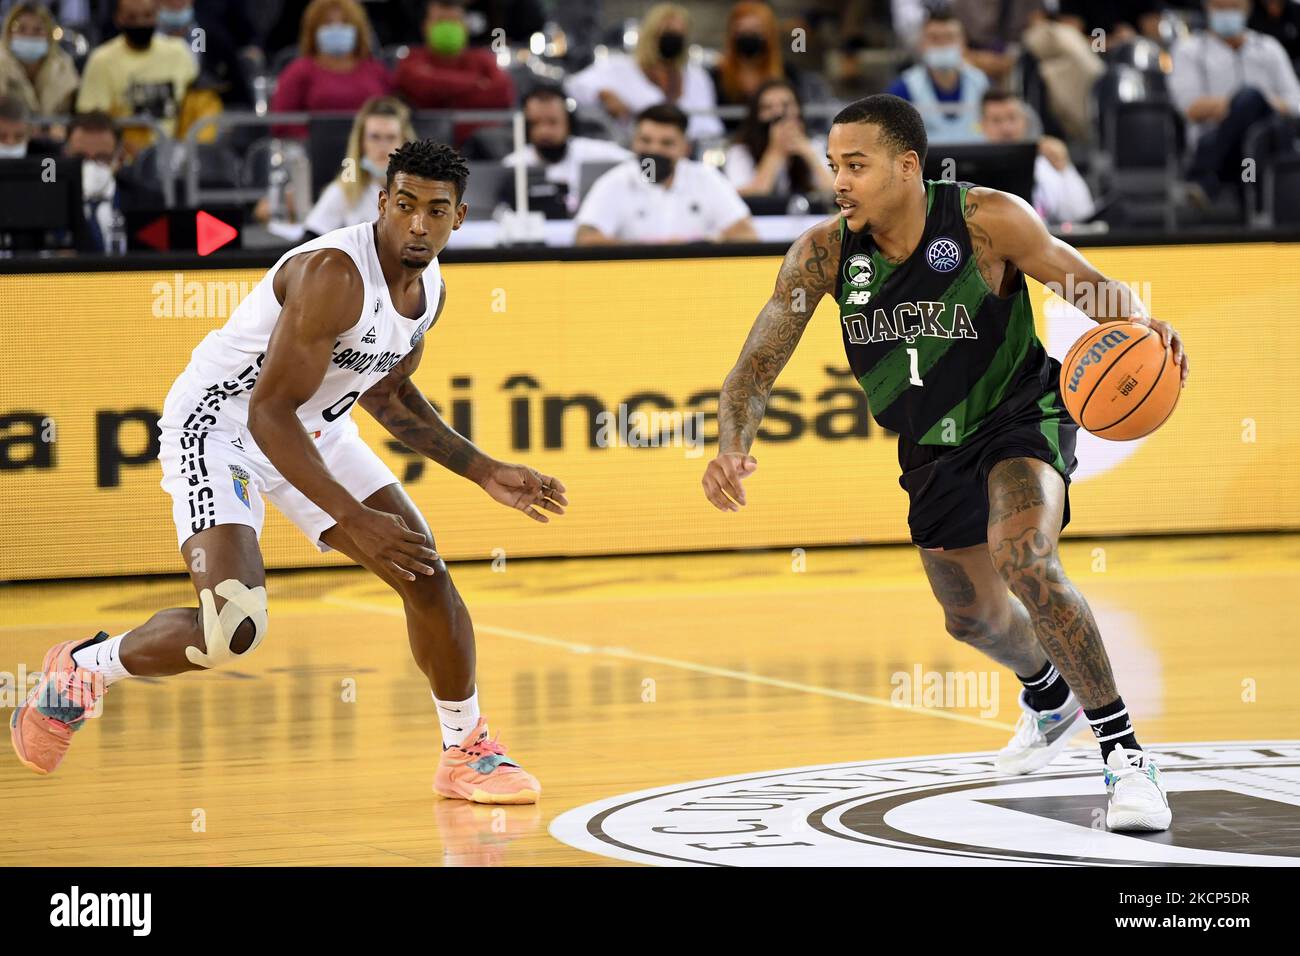 Karel Guzman (L) and Troy Caupain (R) in action during U-BT Cluj-Napoca v Darüssafaka Tekfen in group G of Basketball Champions League, disputed in BT Arena, Cluj-Napoca, 5 October 2021 (Photo by Flaviu Buboi/NurPhoto) Stock Photo